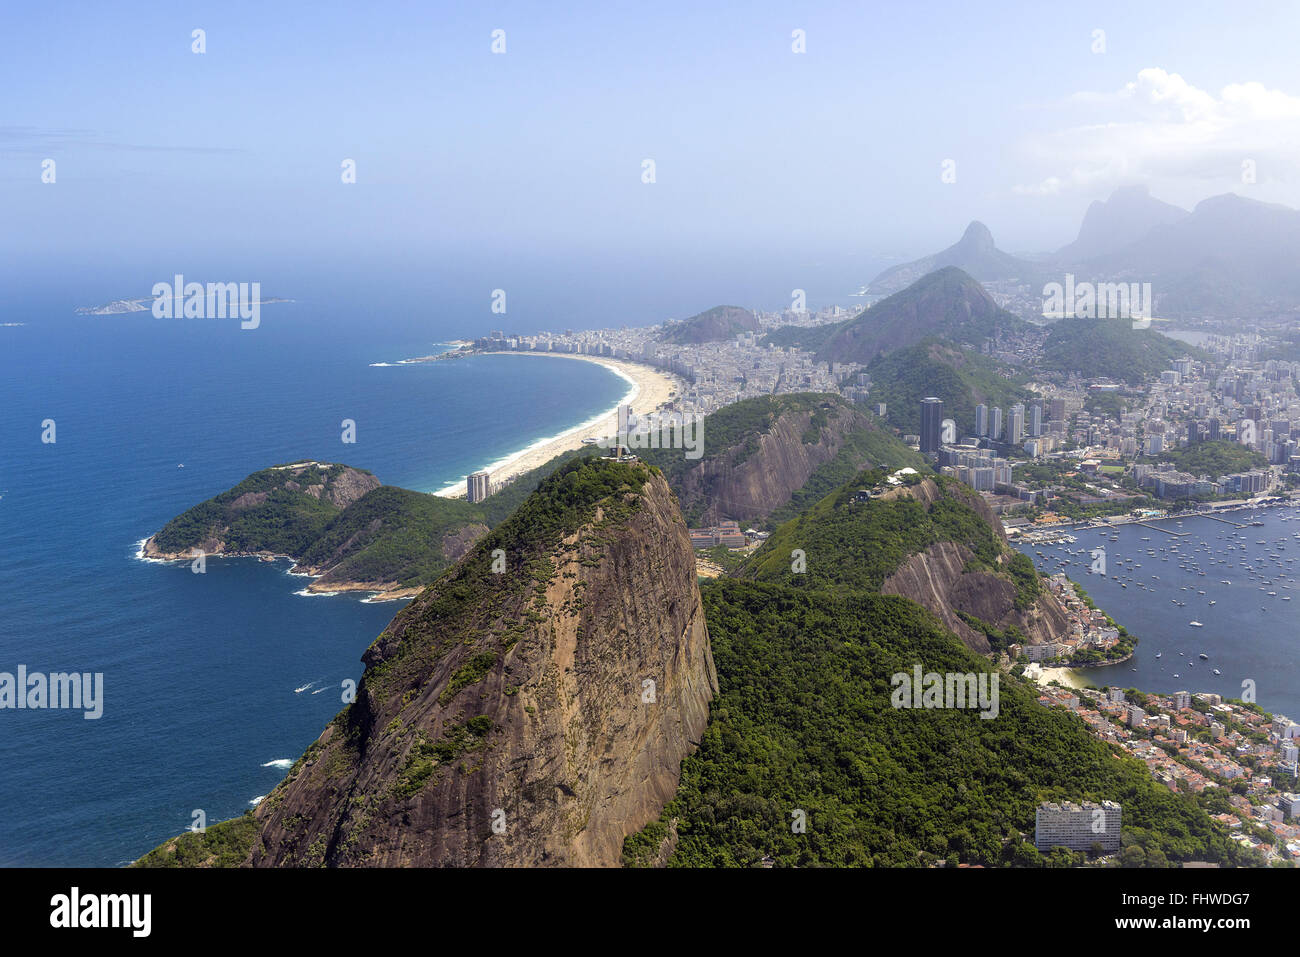 Aerial view of Sugar Loaf Mountain in the foreground and Copacabana beach in the background Stock Photo